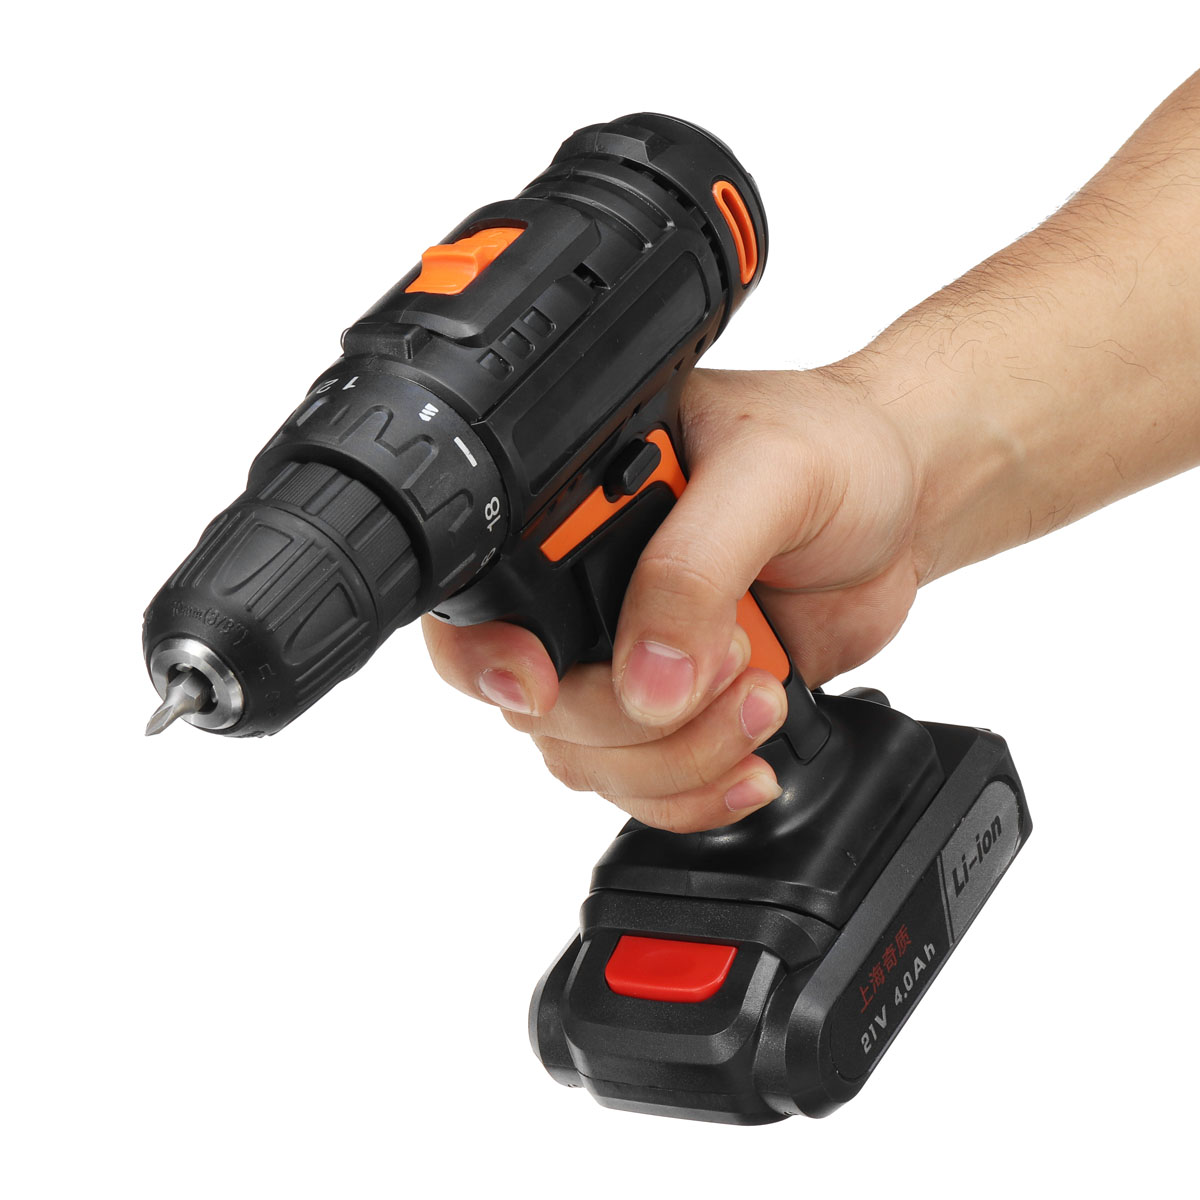 21V-4000mAh-Cordless-Power-Drills-181-Electric-Screw-Driver-Rechargeable-with-1-Li-ion-Battery-1400101